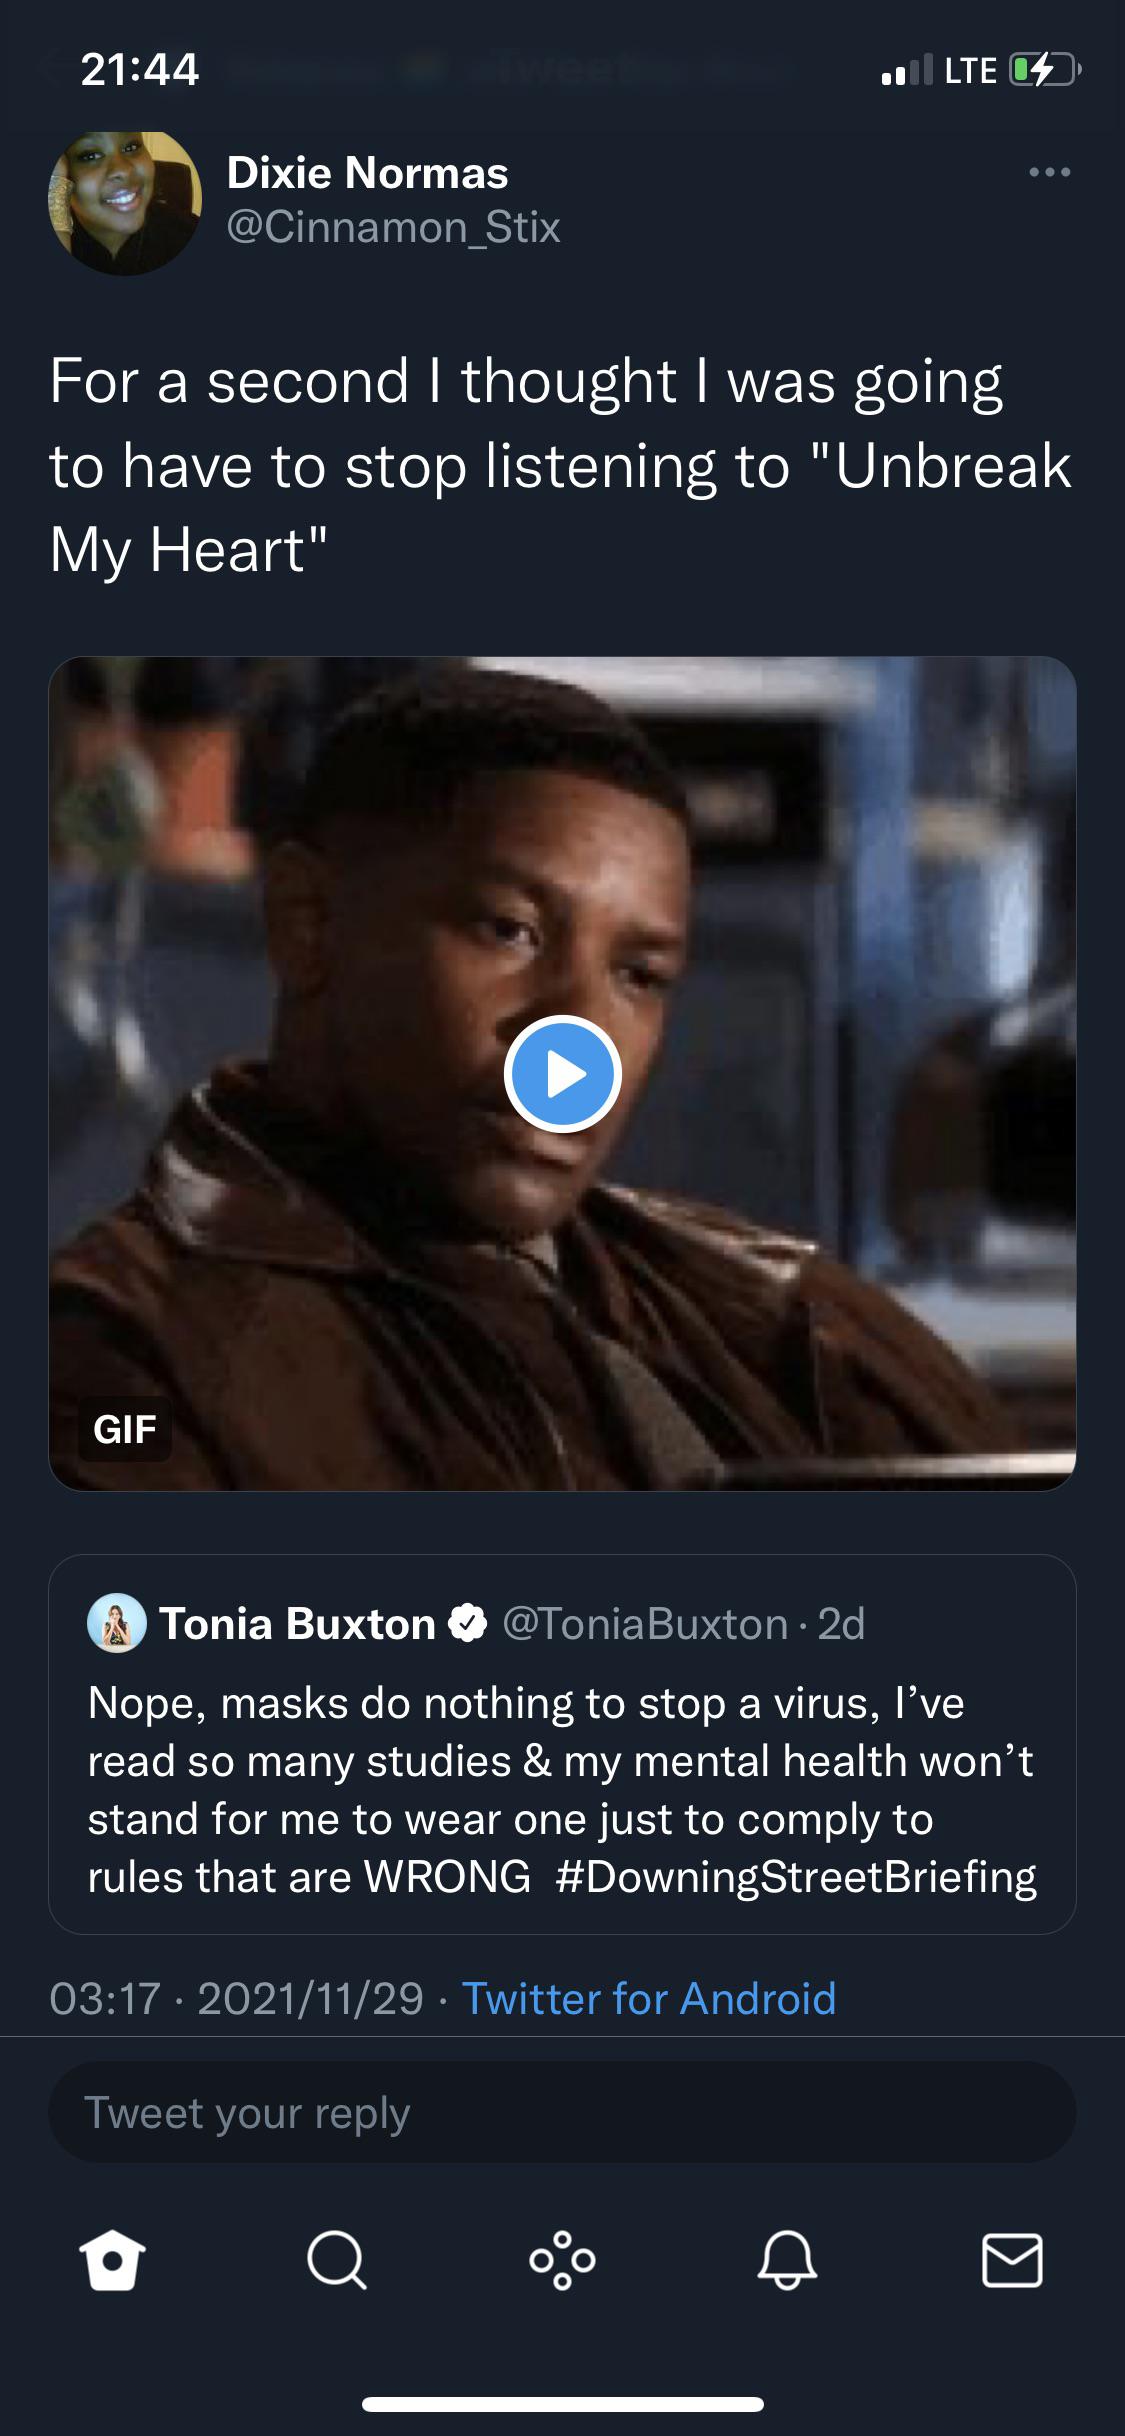 denzel washington phew gif - 1 Lte S Dixie Normas For a second I thought I was going to have to stop listening to "Unbreak My Heart" Gif Tonia Buxton 2d Nope, masks do nothing to stop a virus, I've read so many studies & my mental health won't stand for m